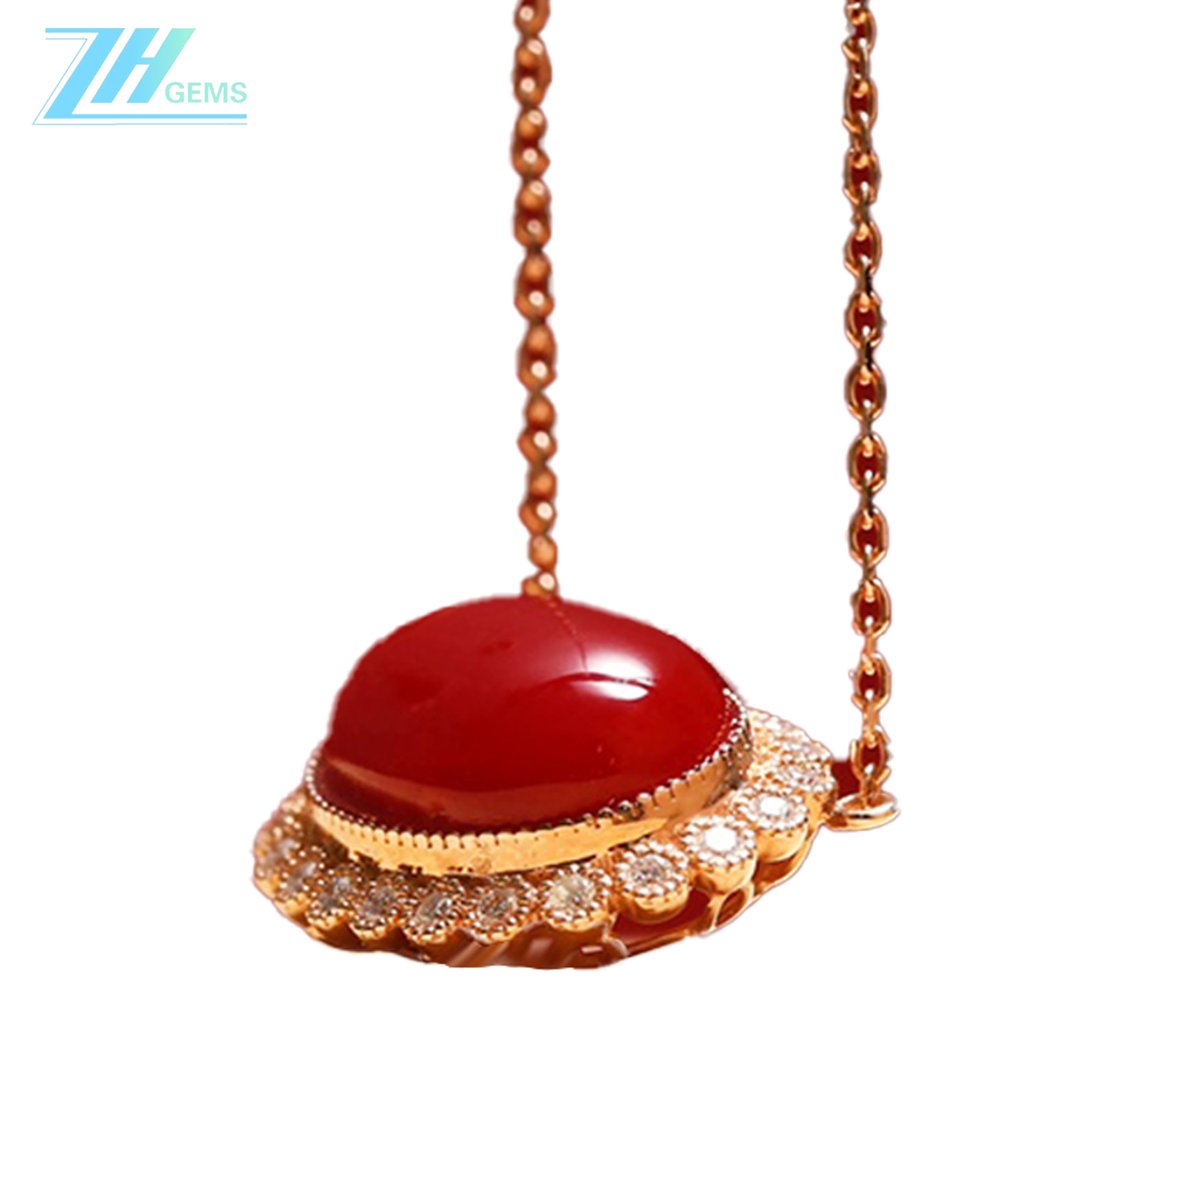 Red Coral Pendant Necklace for Women Gift yourself or a loved one  20240422-09-08  #EnvisionGreatness   #navajojewelry   #turquoisejewelry   #turquoise   #satisfying    #dayattheoffice    #suchascientist    #jewelrymaking    #stevenuniverse    #cartoonnetwork    #malachite